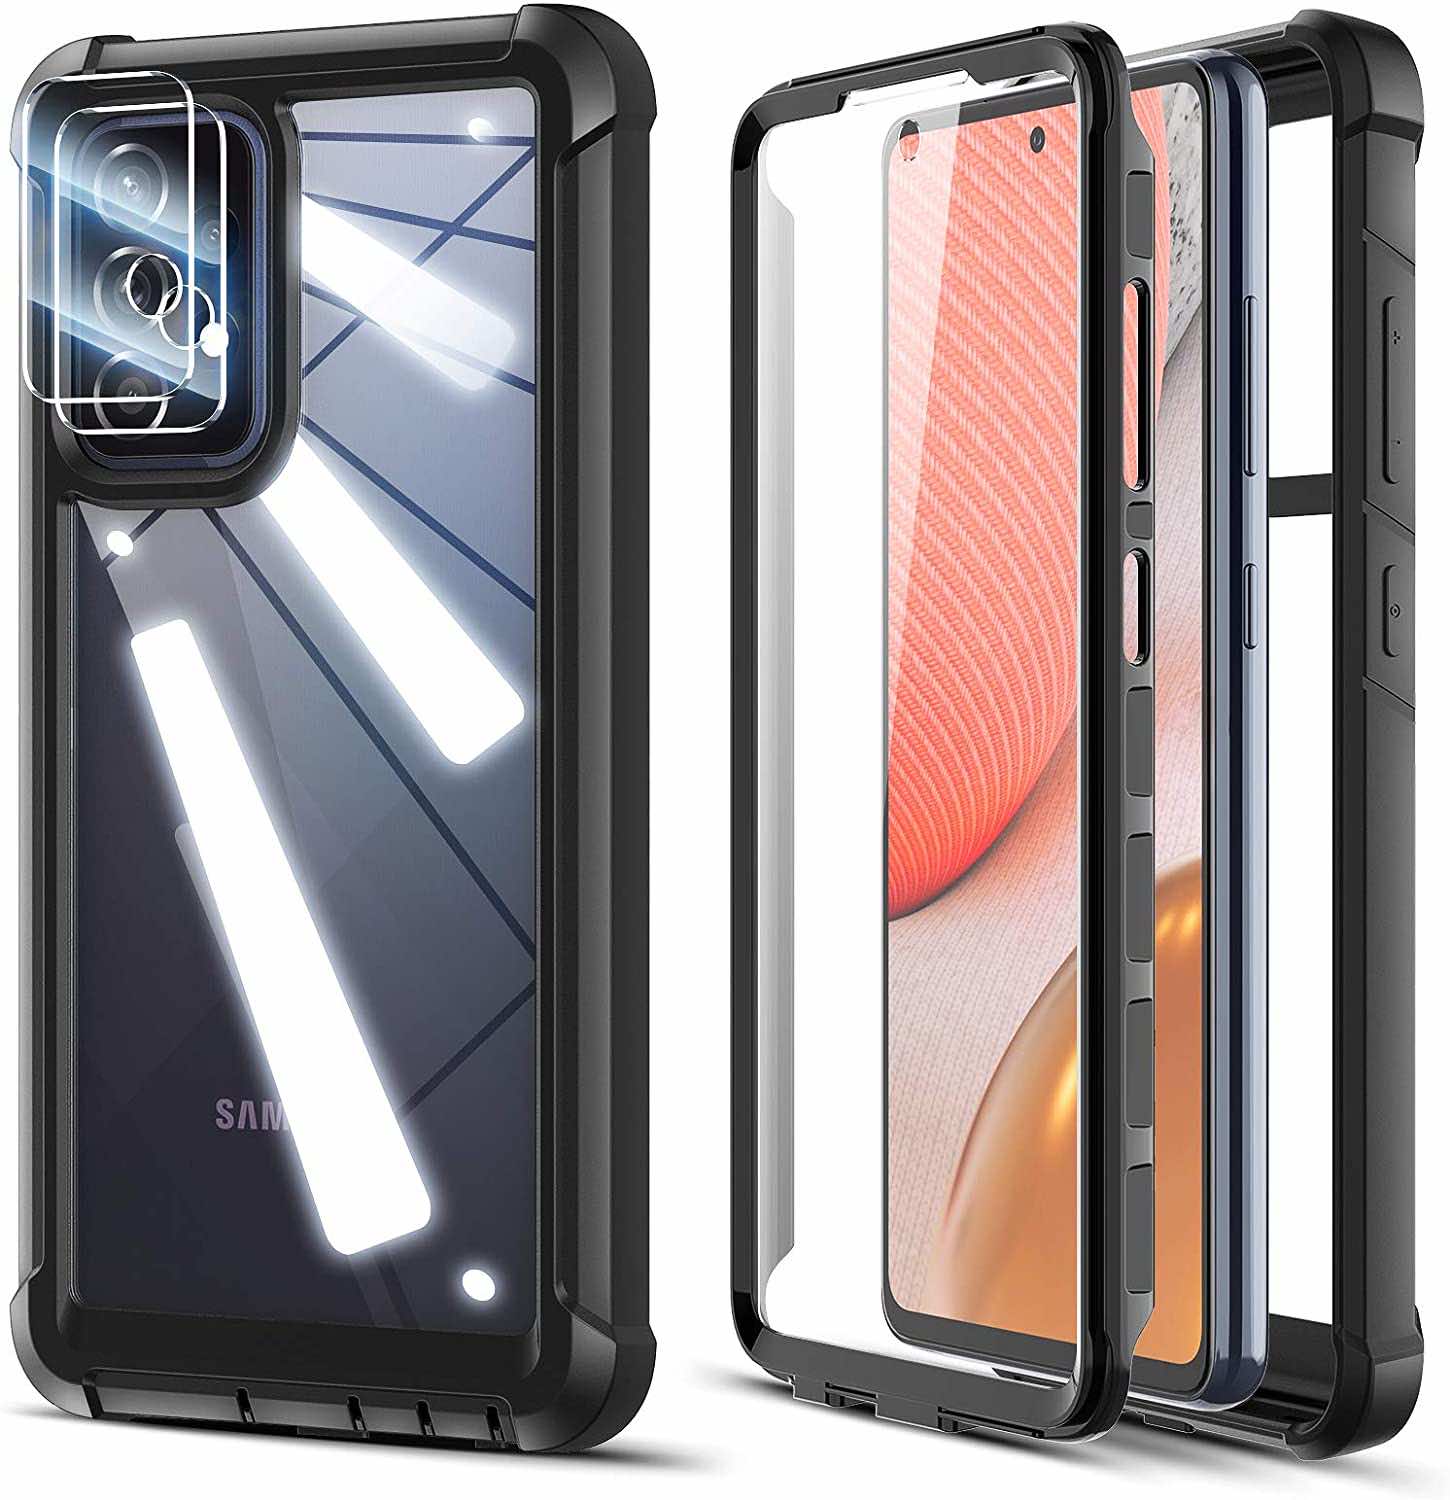 Samsung Galaxy A72 Case HOOMIL Samsung A72 Case Soft Slim Fit Transparent Protective TPU Silicone Bumper Cover for Samsung Galaxy A72 Phone Case